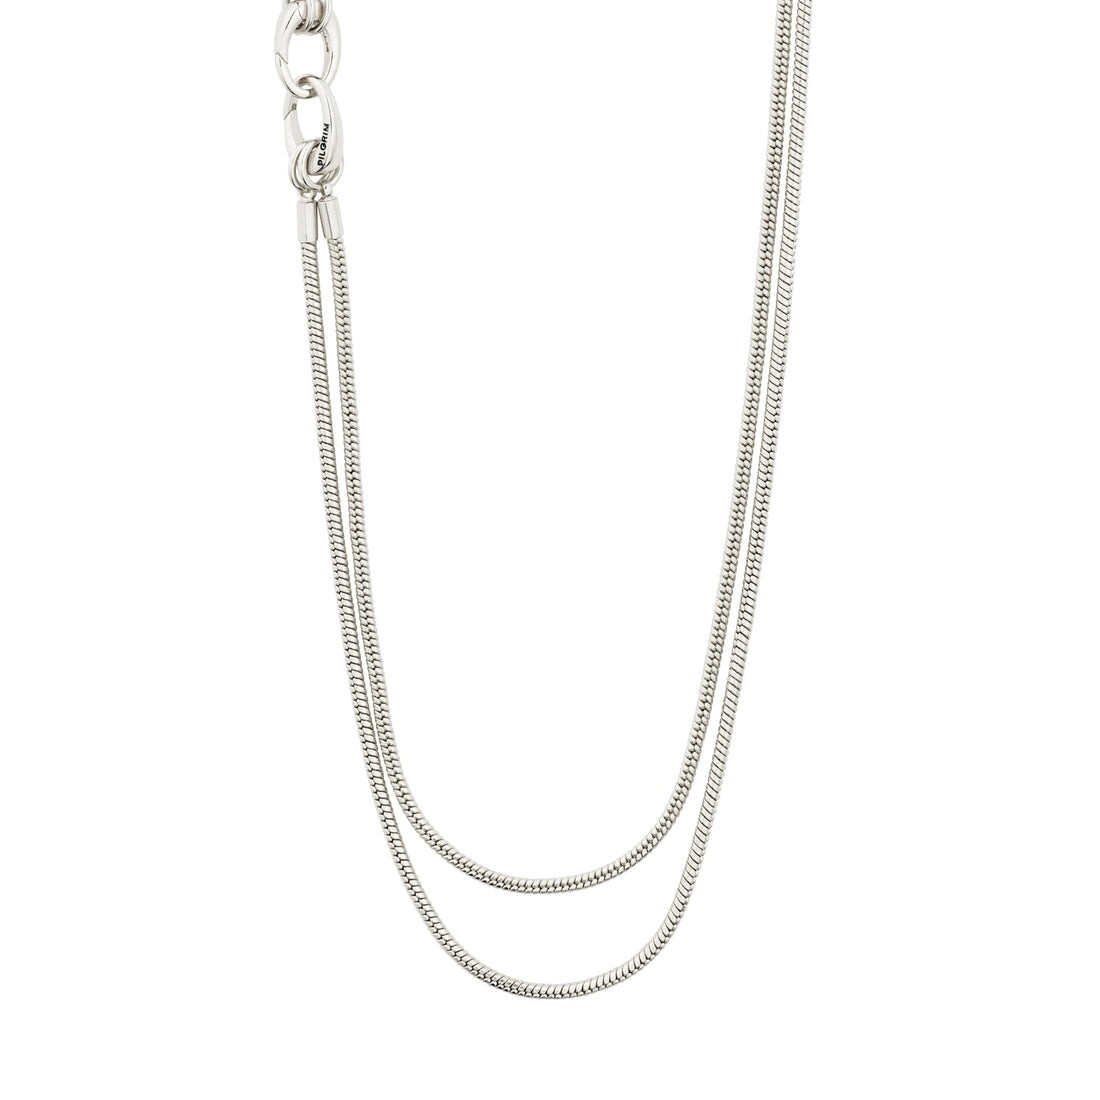 Pilgrim Silver Solidarity Snake Chain Necklace